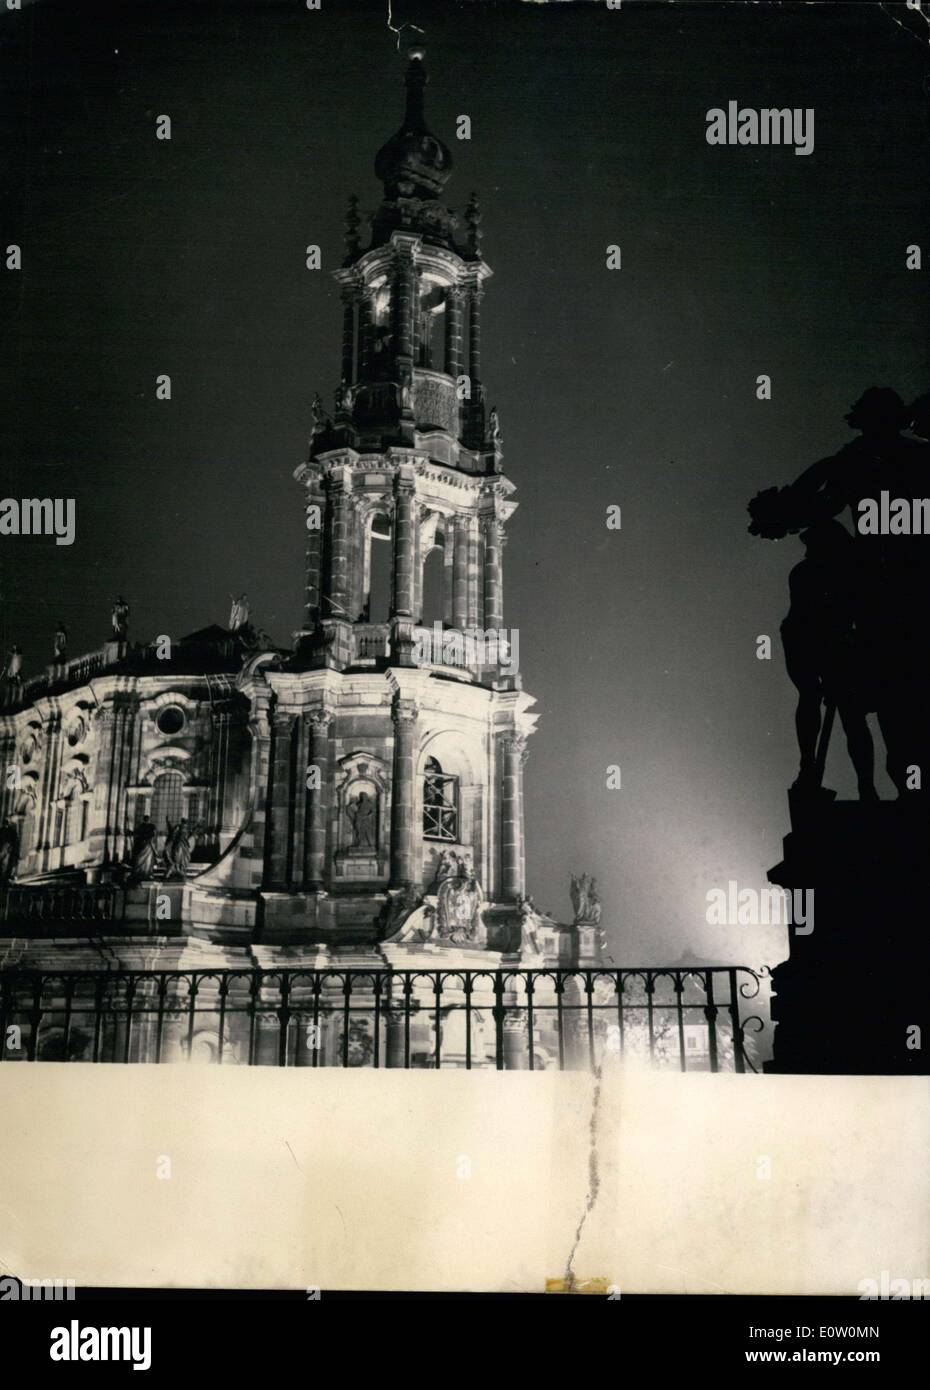 Oct. 19, 1960 - Pictured here is the ''Katholische Hofkirche'' in Dresden. Construction on it began in 1737 and was completed in 1751. It was built by Italian Gaetano Chiaveri. The tower was made by Julius Heinrich Schwarze. The church itself was heavily damaged during World War II and was rebuilt. Stock Photo